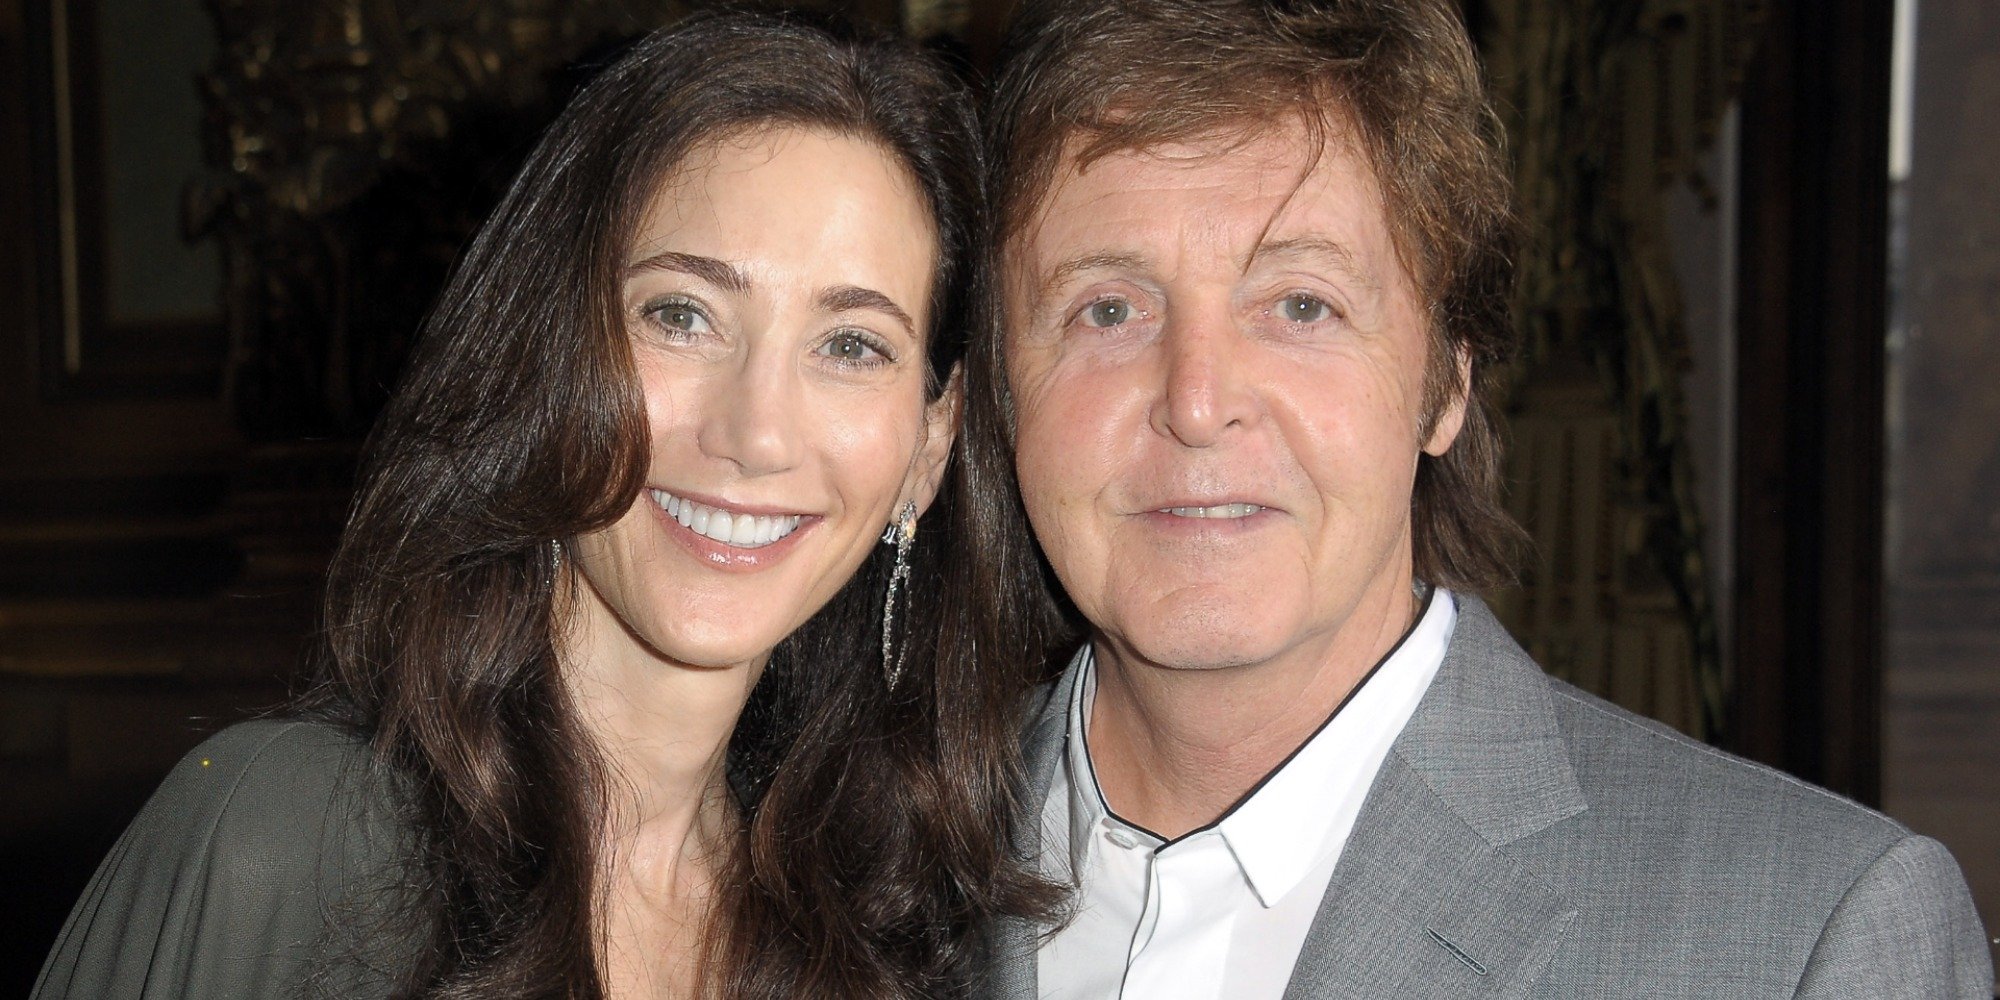 Nancy Shevell and Paul McCartney pose for a press photograph.